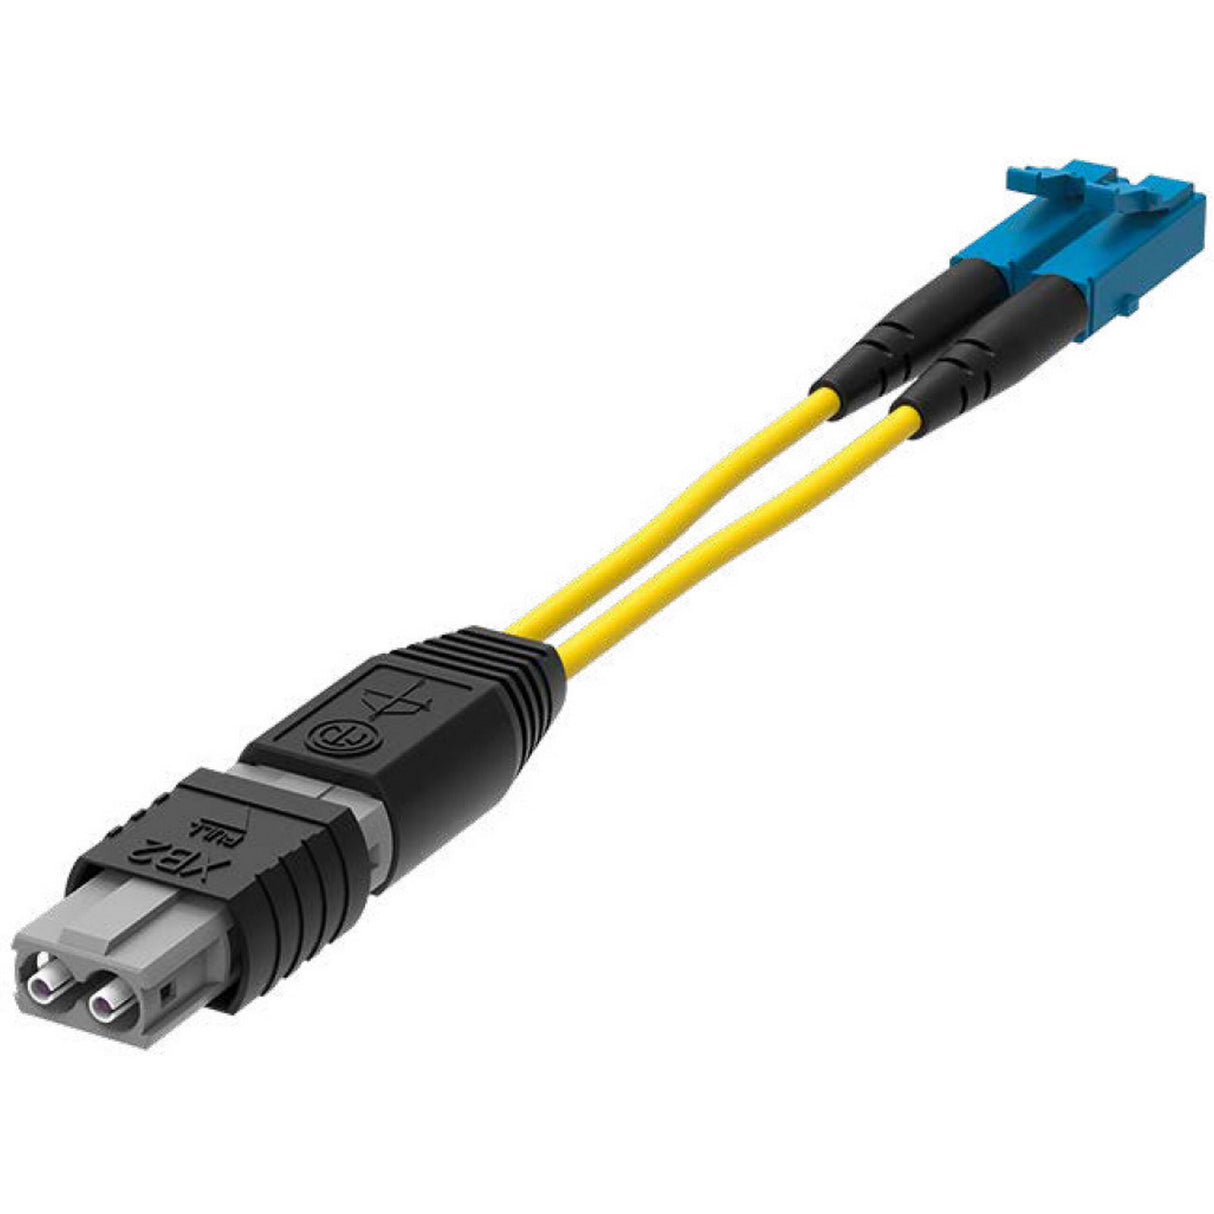 Neutrik NKOBM2S-XP-0-1 opticalCON DRAGONFLY XB2 Male to LC Breakout Cable, 1-Meter